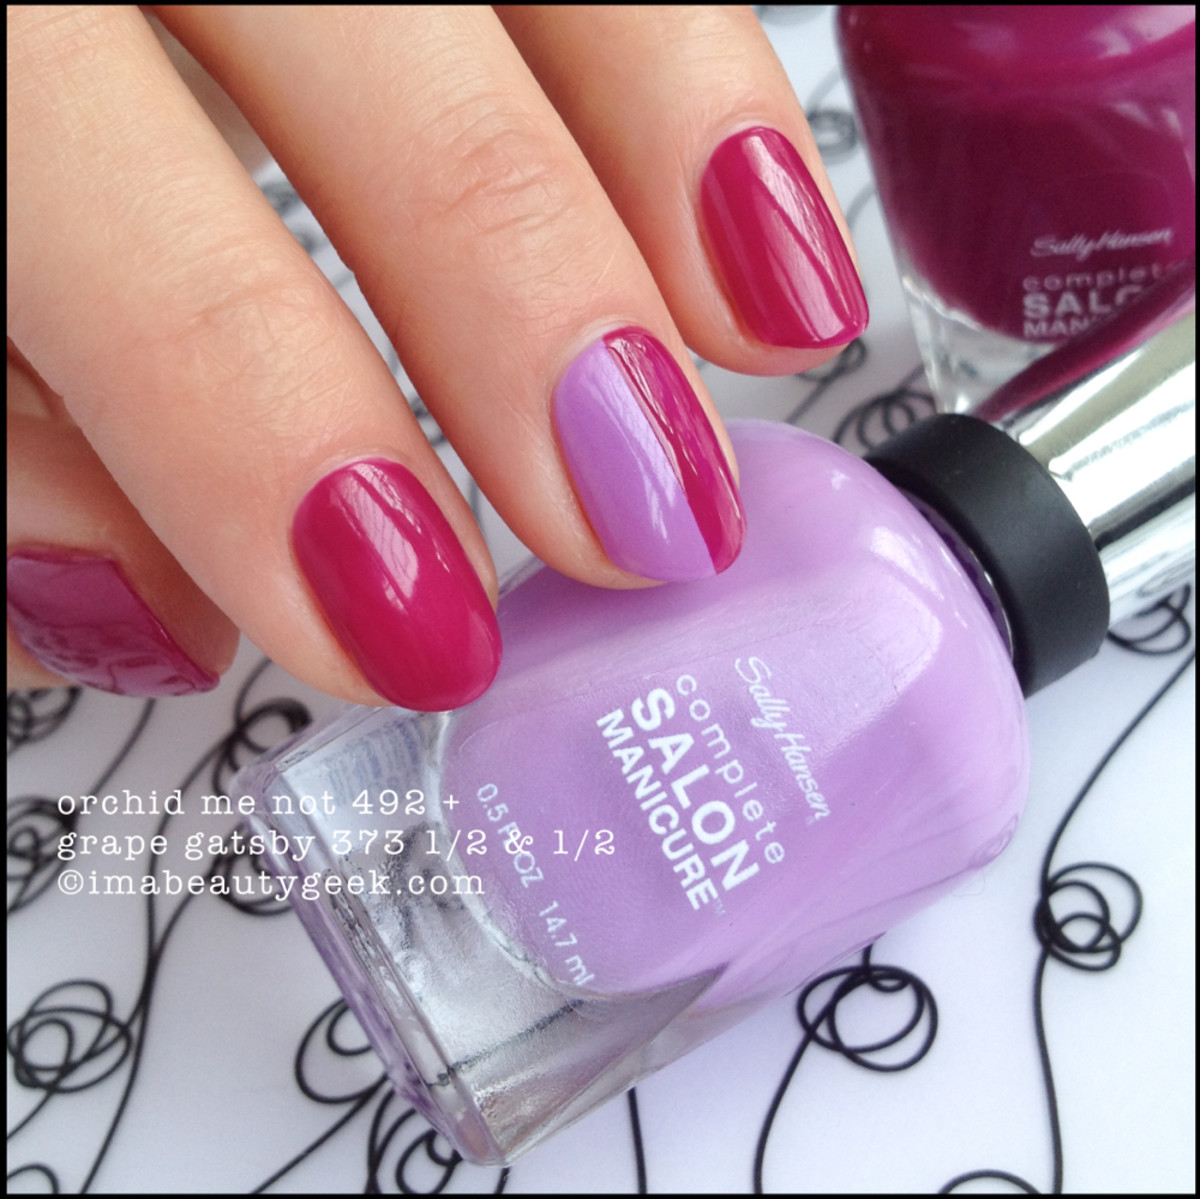 Tone-and-tone negative-space mani with Sally Hansen